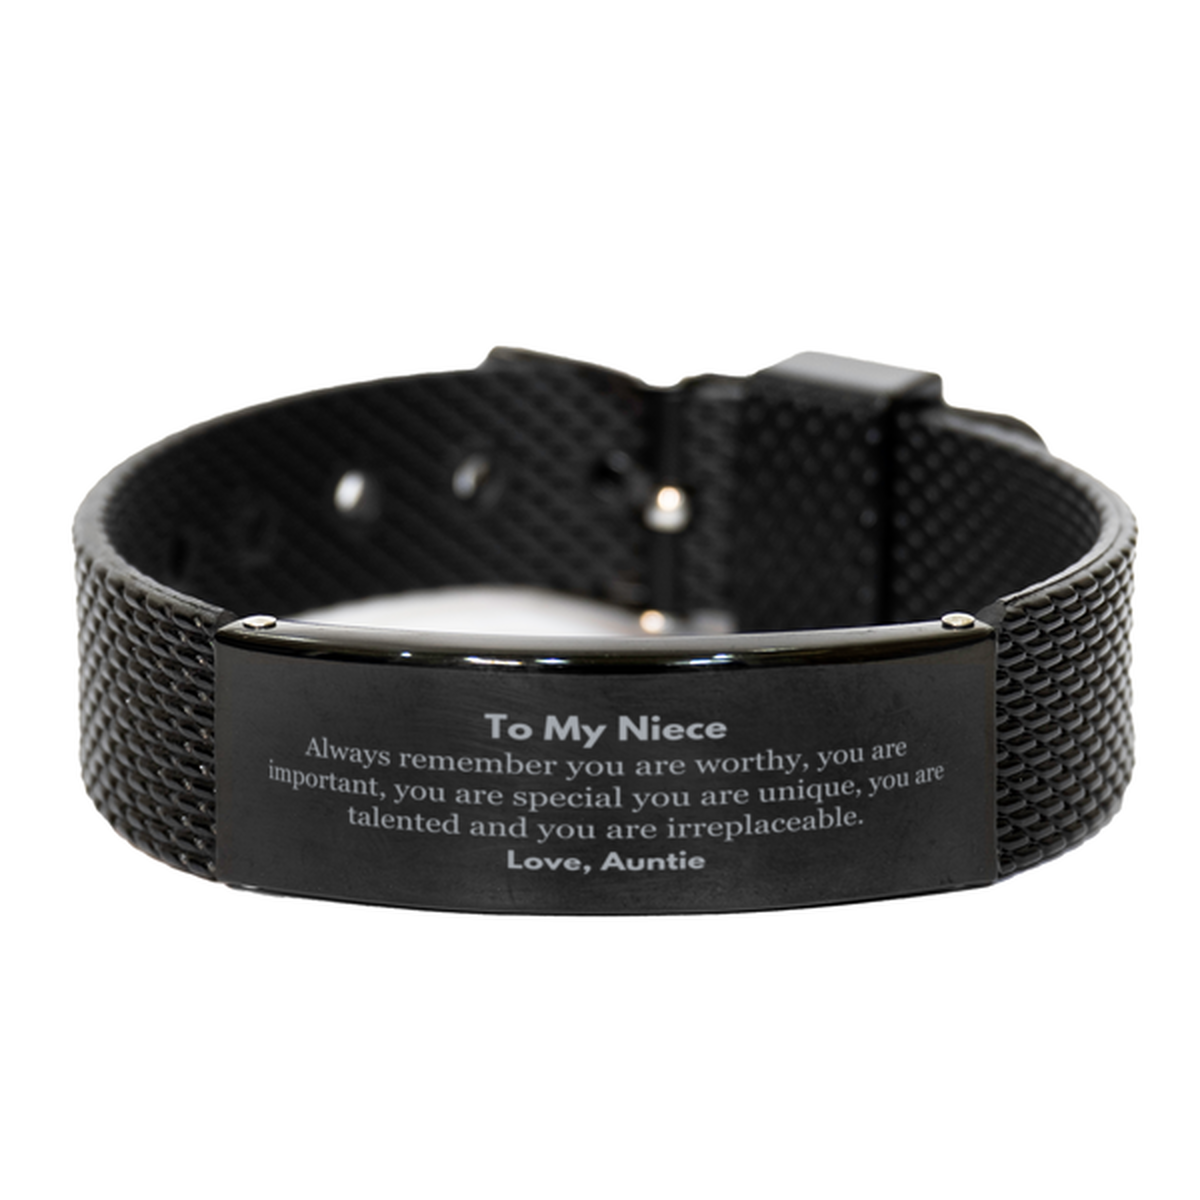 Niece Birthday Gifts from Auntie, Inspirational Black Shark Mesh Bracelet for Niece Christmas Graduation Gifts for Niece Always remember you are worthy, you are important. Love, Auntie